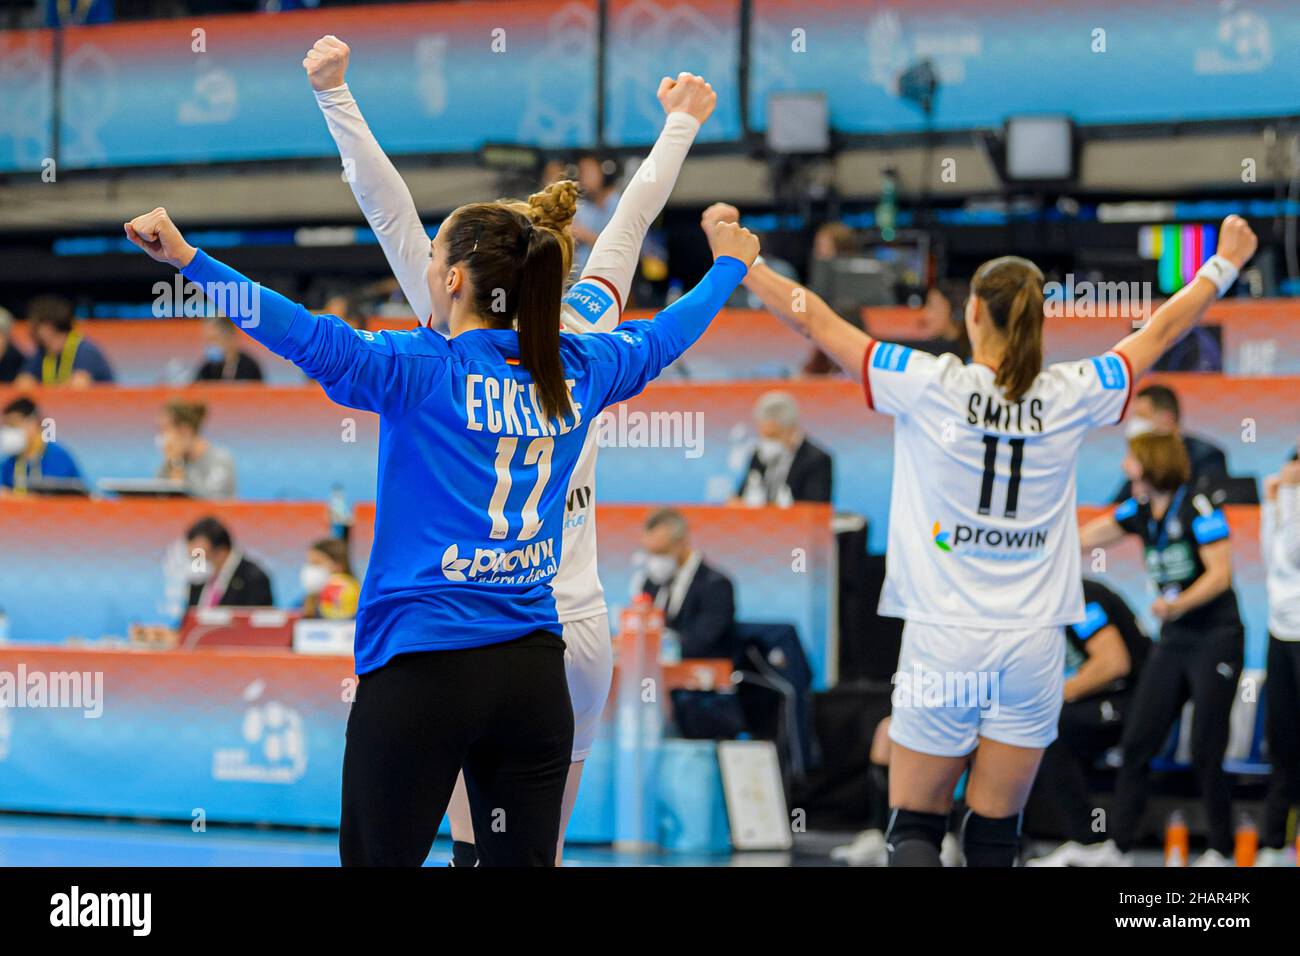 Barcelona, Spain. 14th Dec, 2021. Handball, Women: World Cup, Spain - Germany, final round, quarter-final: Germany's goalkeeper Dinah Eckerle (l) and Xenia Smits cheer. Credit: Marco Wolf/wolf-sportfoto/dpa/Alamy Live News Stock Photo